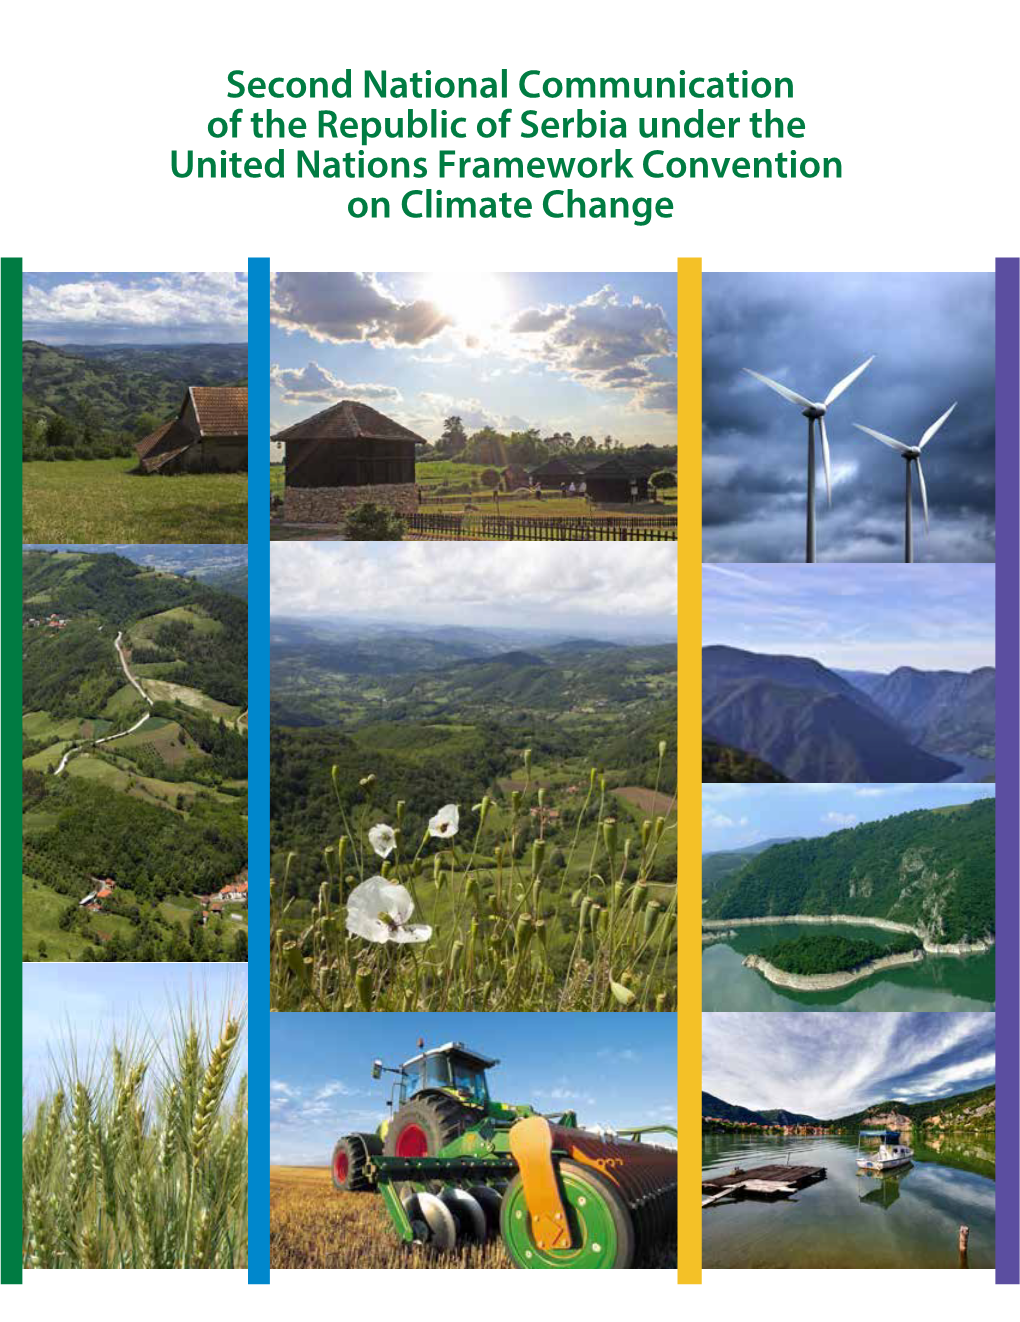 Second National Communication of the Republic of Serbia Under the UNFCCC Was Produced Through a Project Financed by the Global Environmental Facility (GEF)